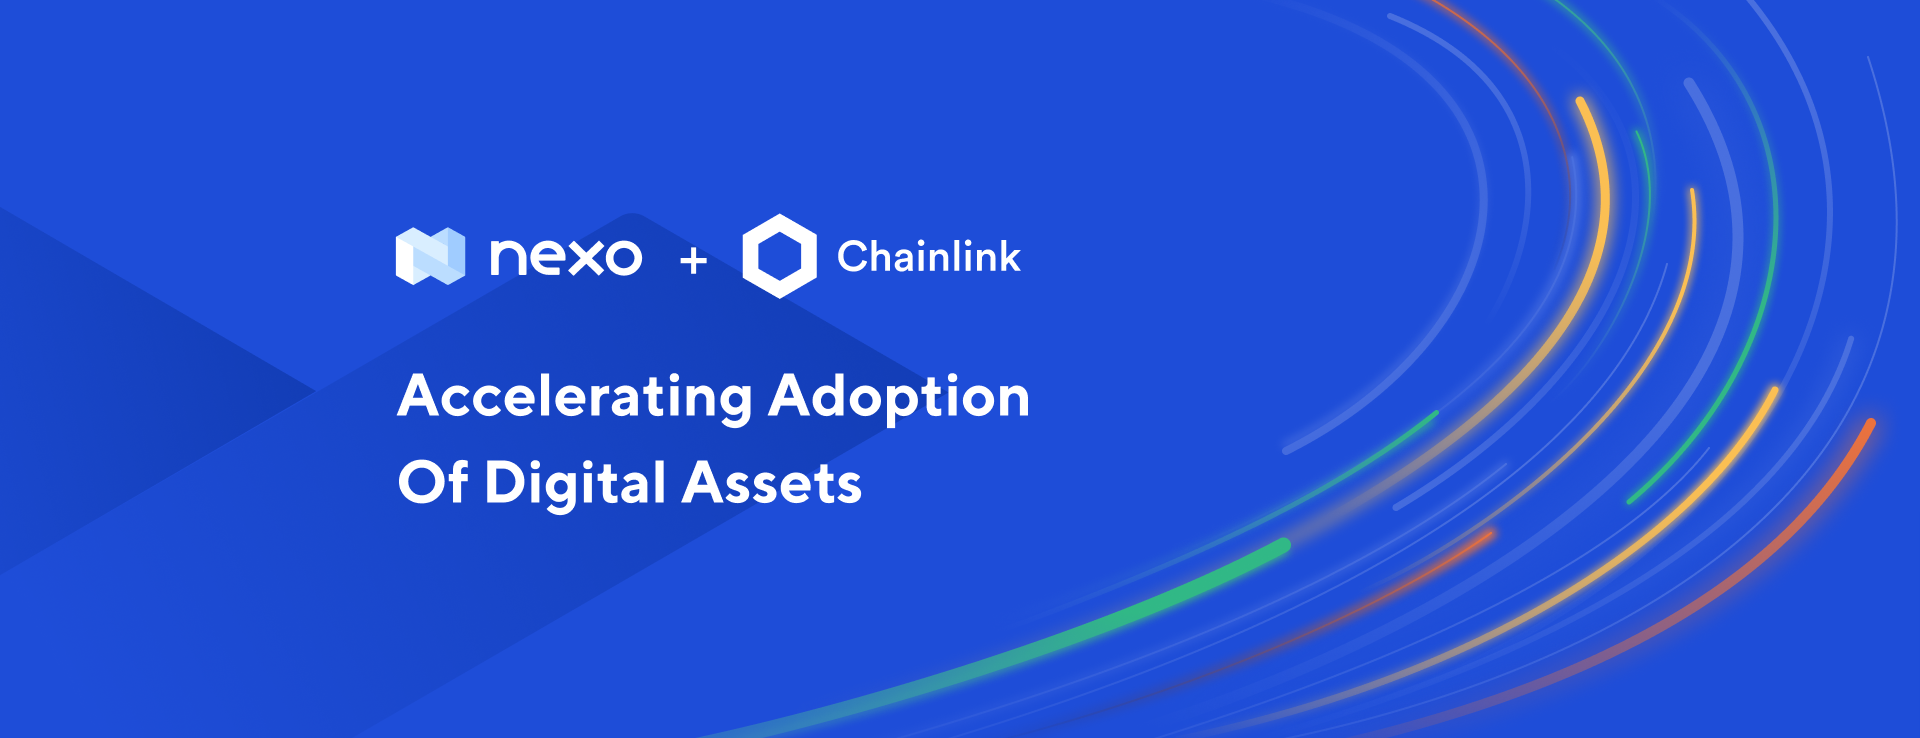 Nexo and Chainlink Collaborate to Accelerate the Adoption of Digital Assets